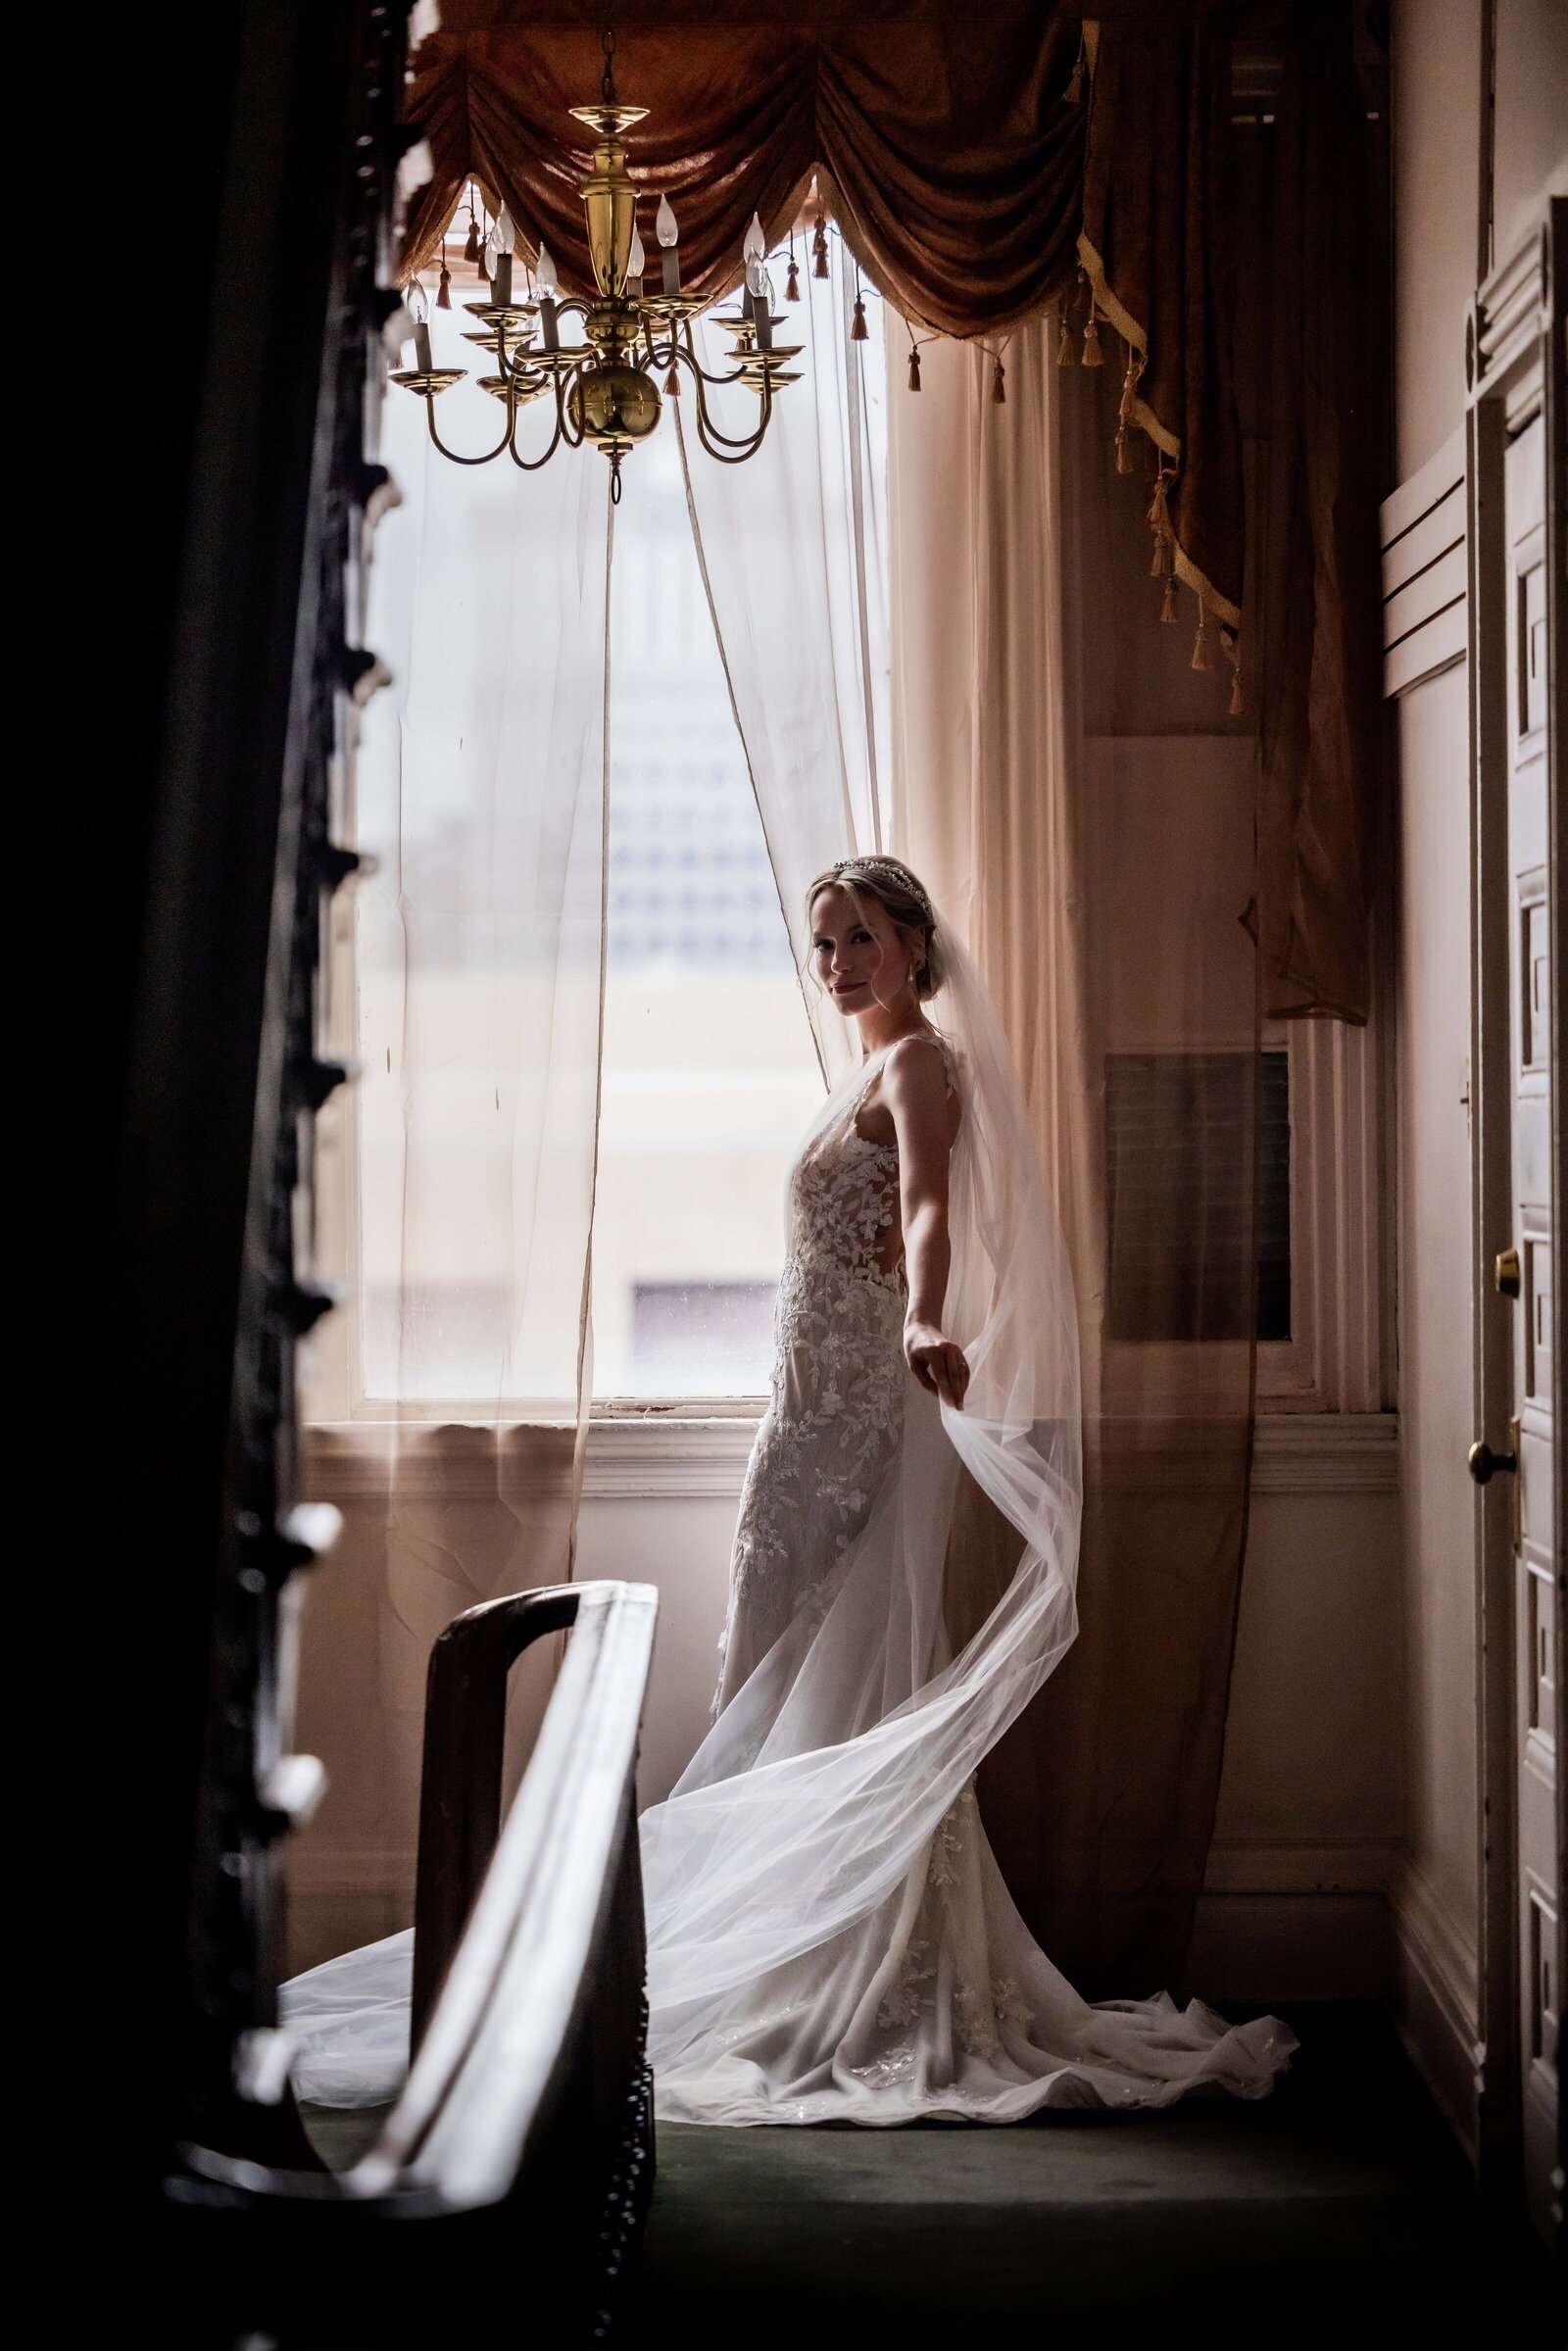 Capturing the essence of bridal elegance, this stunning couture portrait features a bride framed by a window's natural light. The delicate interplay of light and shadow highlights the intricate details of her gown, creating a serene and ethereal atmosphere. This image is perfect for those seeking inspiration for their own bridal look or anyone who appreciates the art of fine wedding photography.